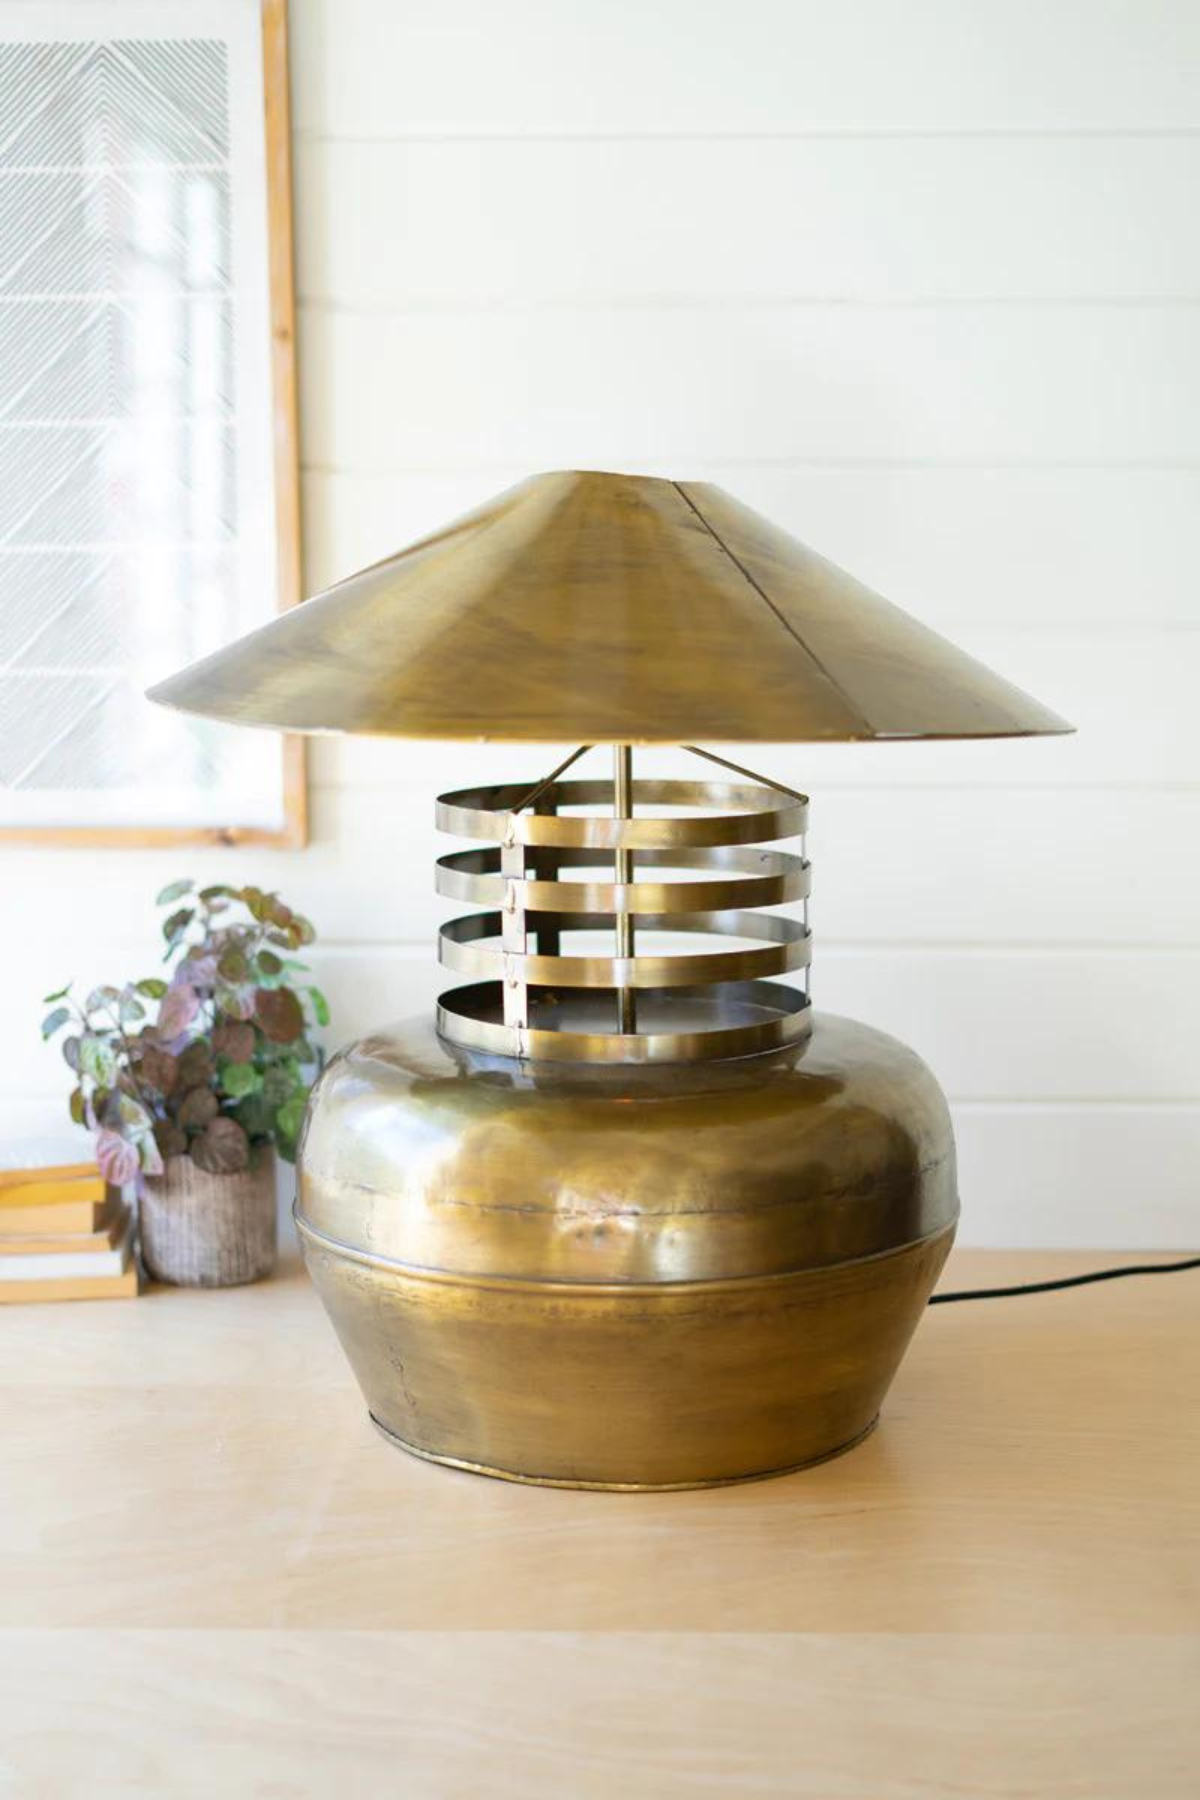 Biltmore Antique Brass Table Lamp - THELIFESTYLEDCO Shop